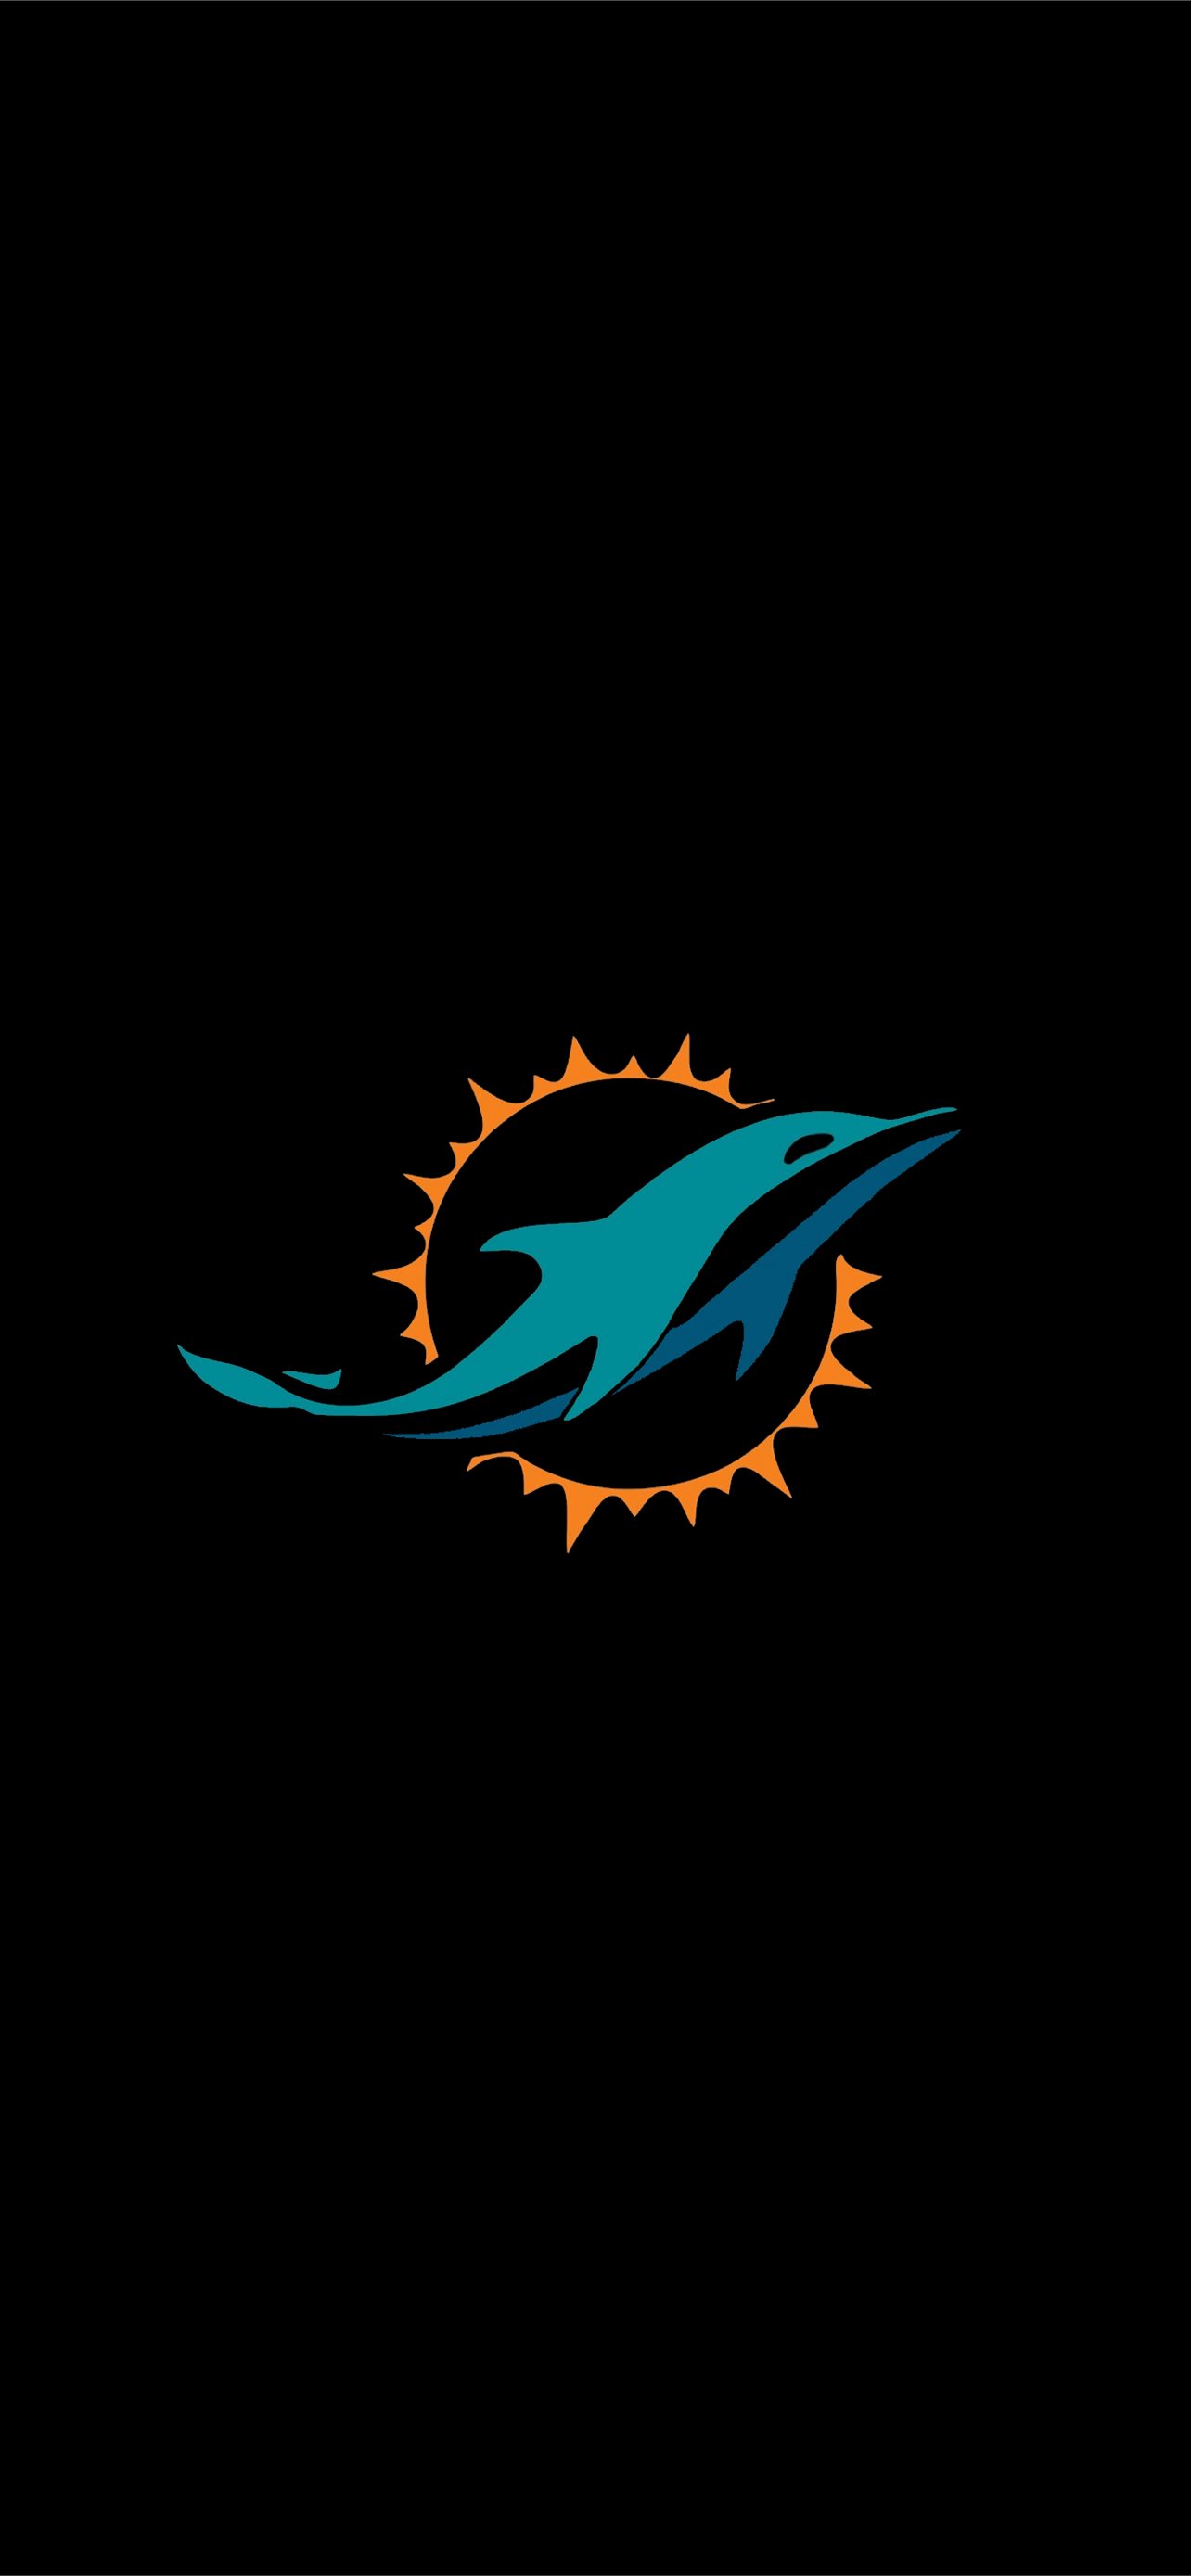 200+] Miami Dolphins Wallpapers | Wallpapers.com